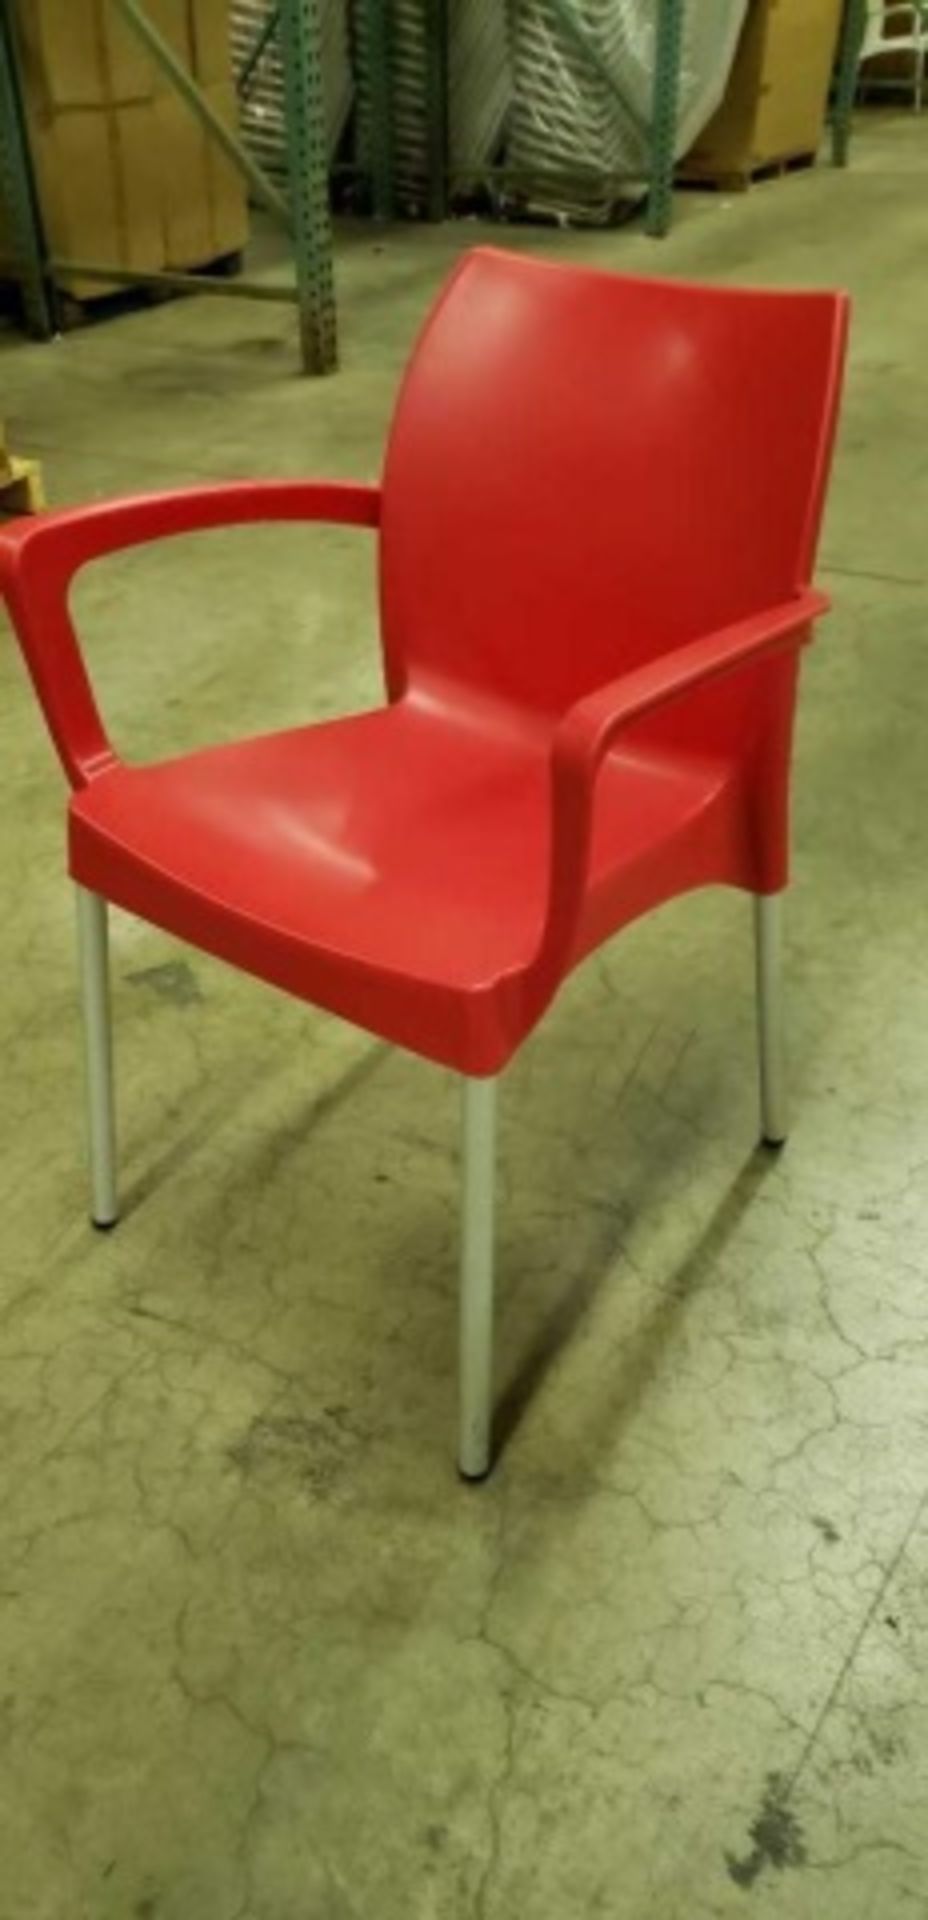 Domenica Arm Chair, red, one box w/ 3, 3 total - Image 3 of 4